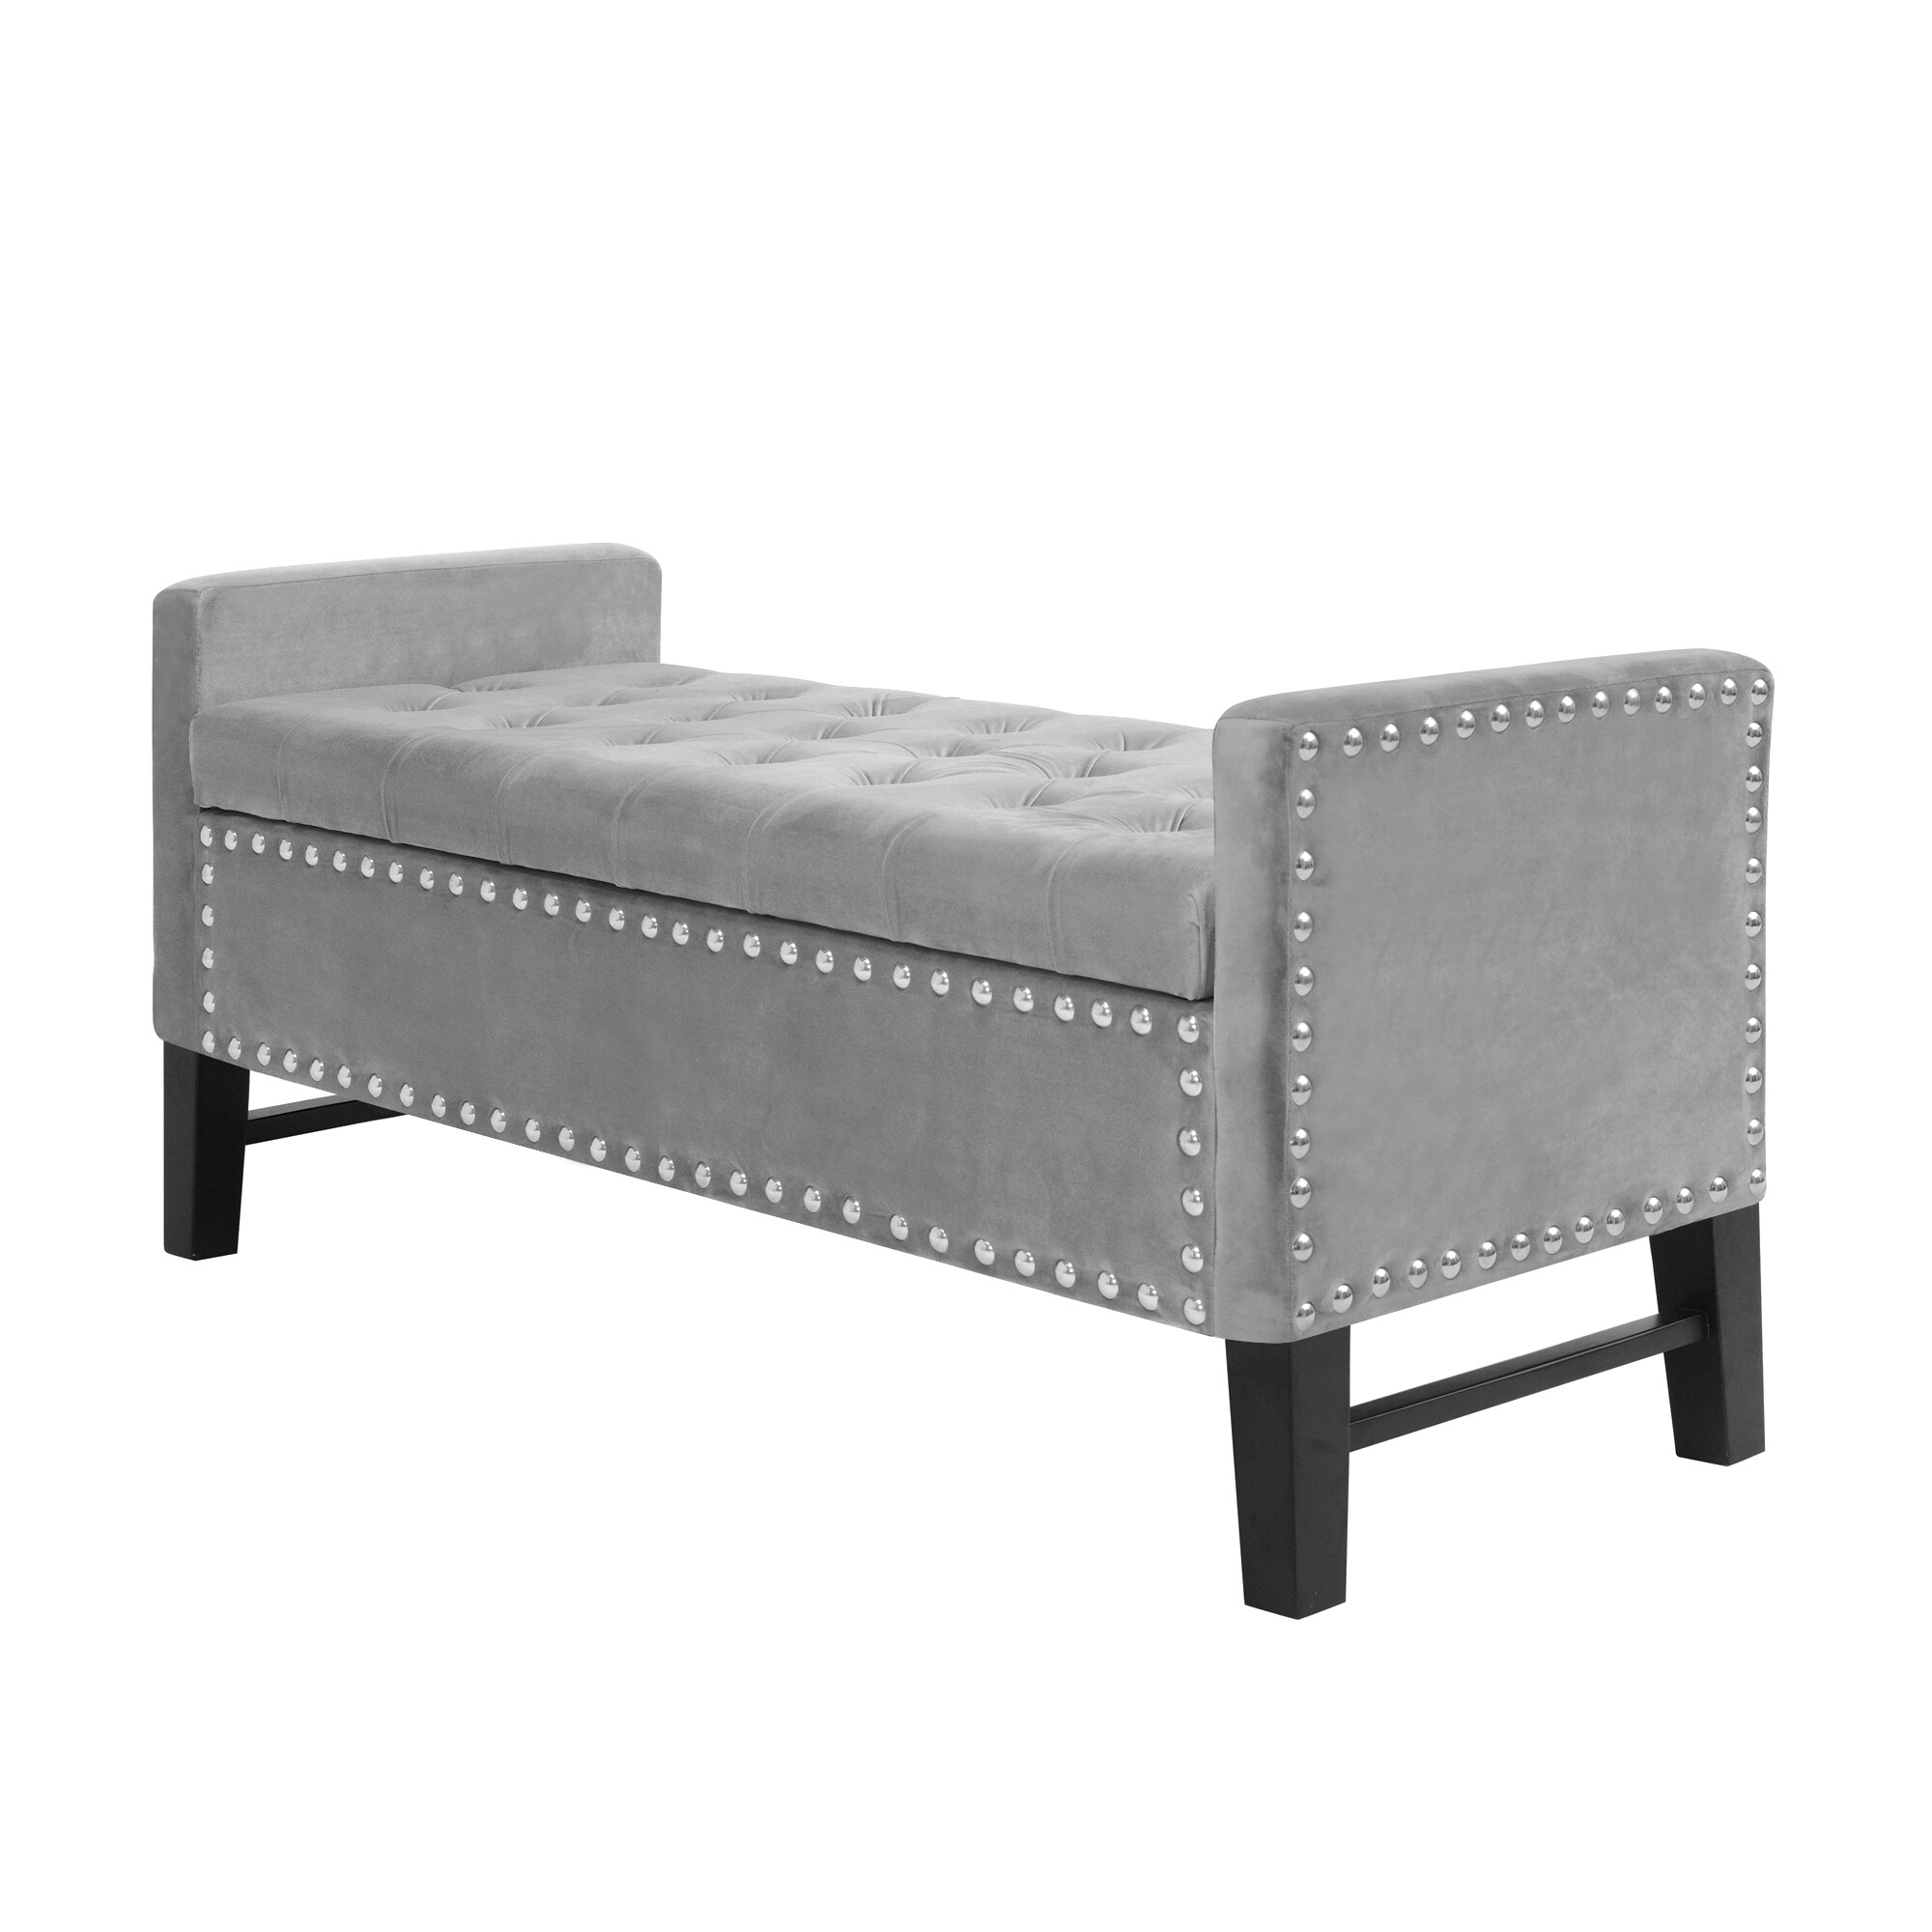 Inspired Home Emmaline Modern Light the in x department 22.05-in Bench Storage Benches with Storage Grey at 50-in